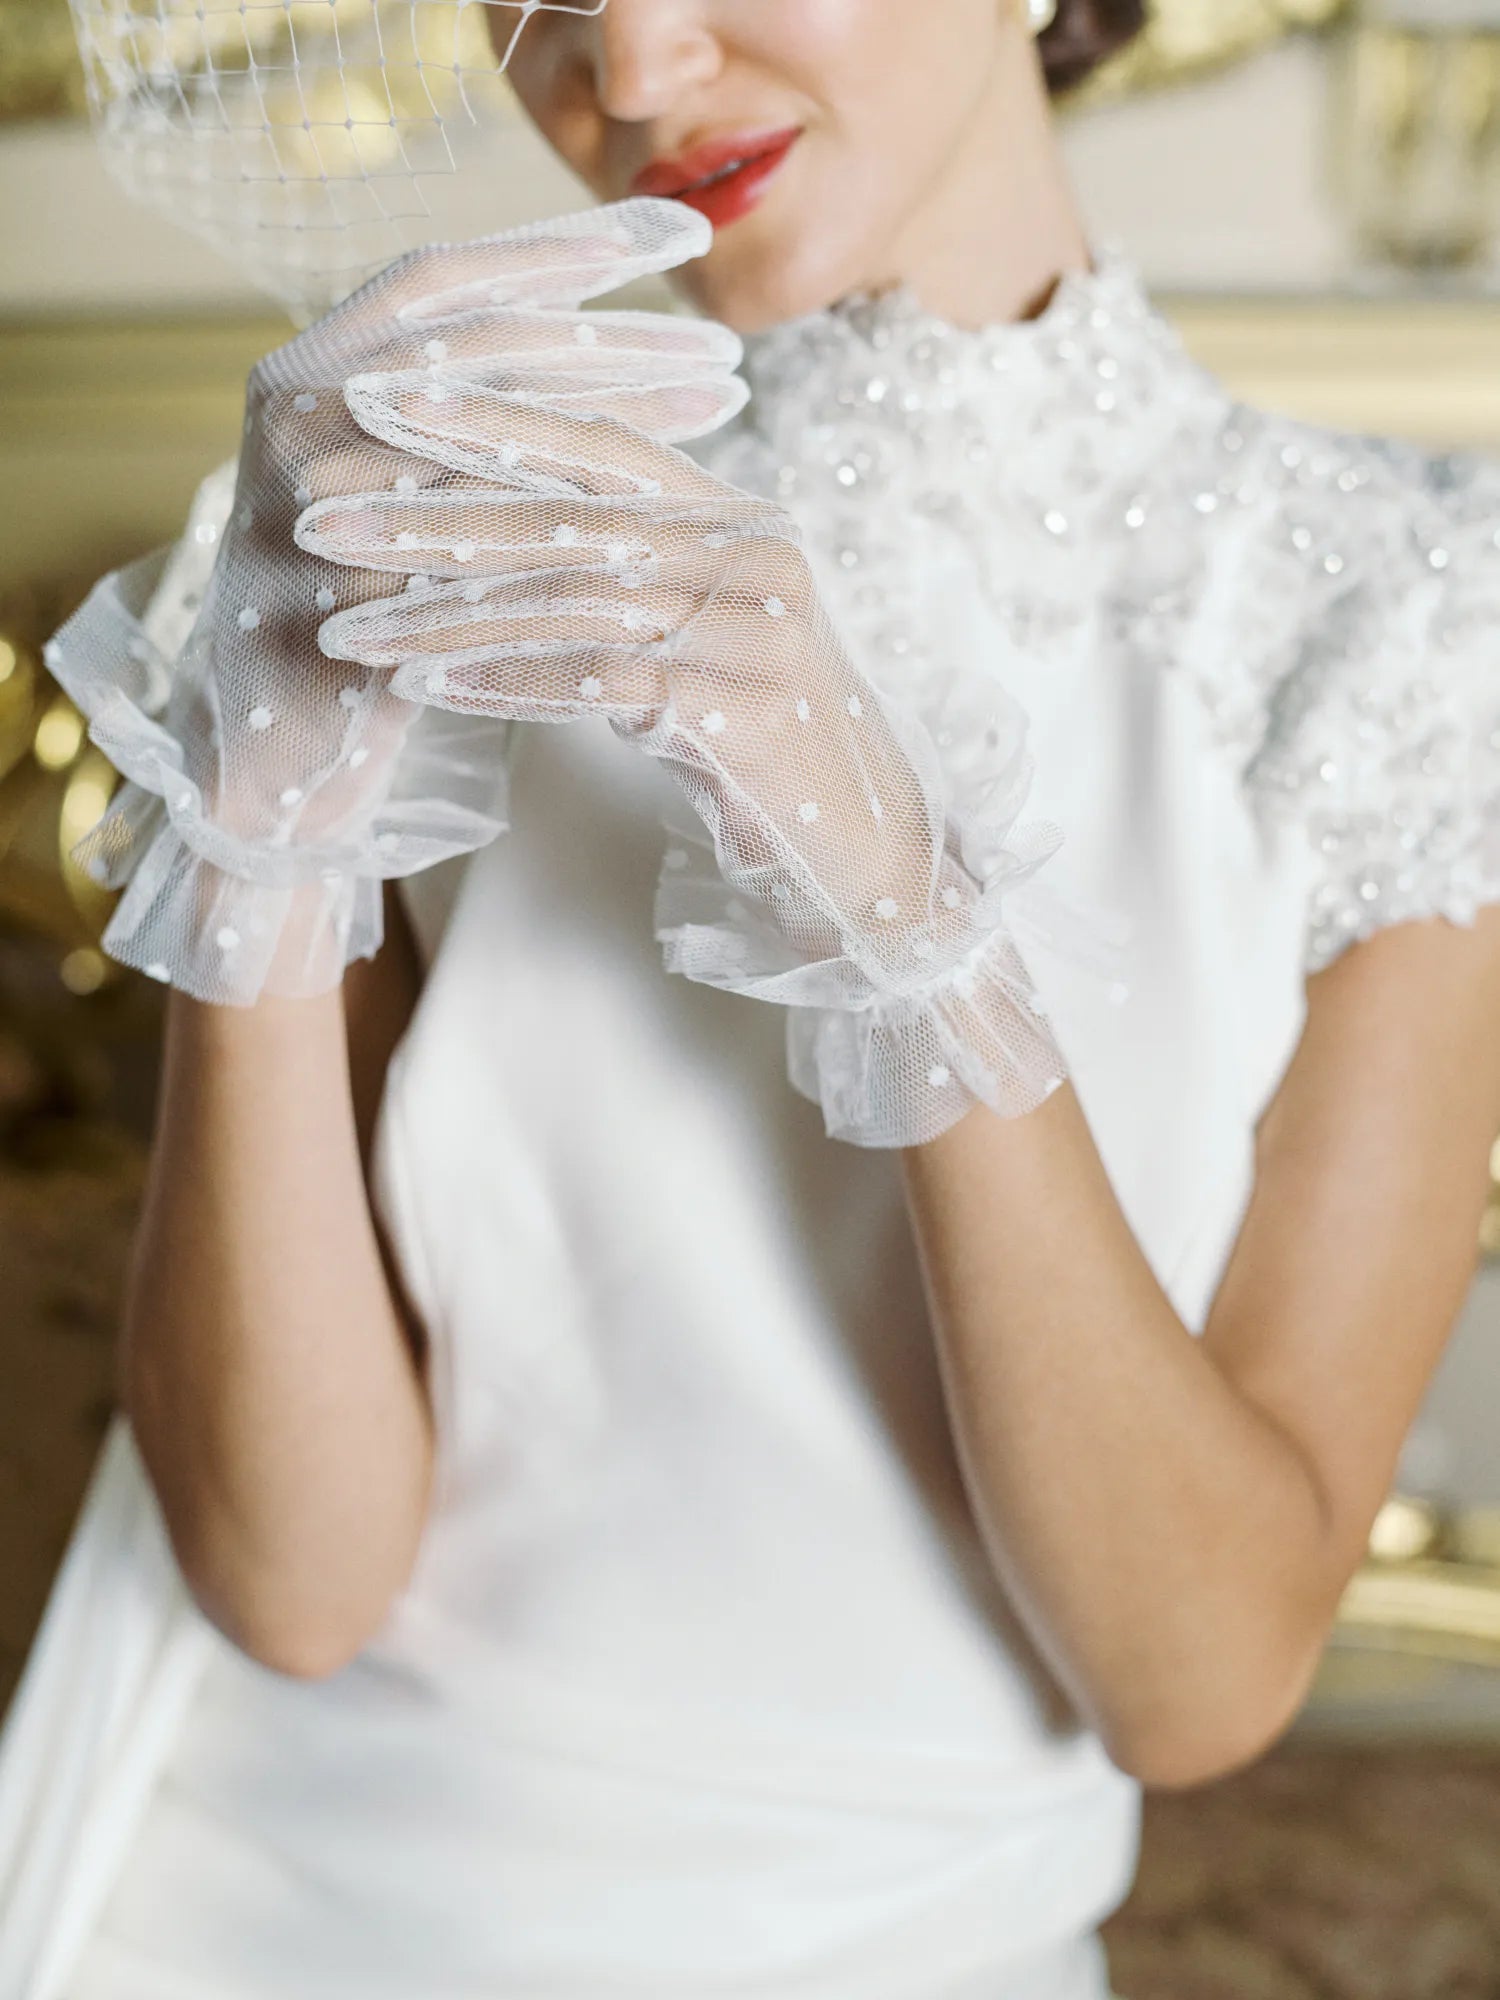 Women playing with hands wearing white tulle polka dot golves.